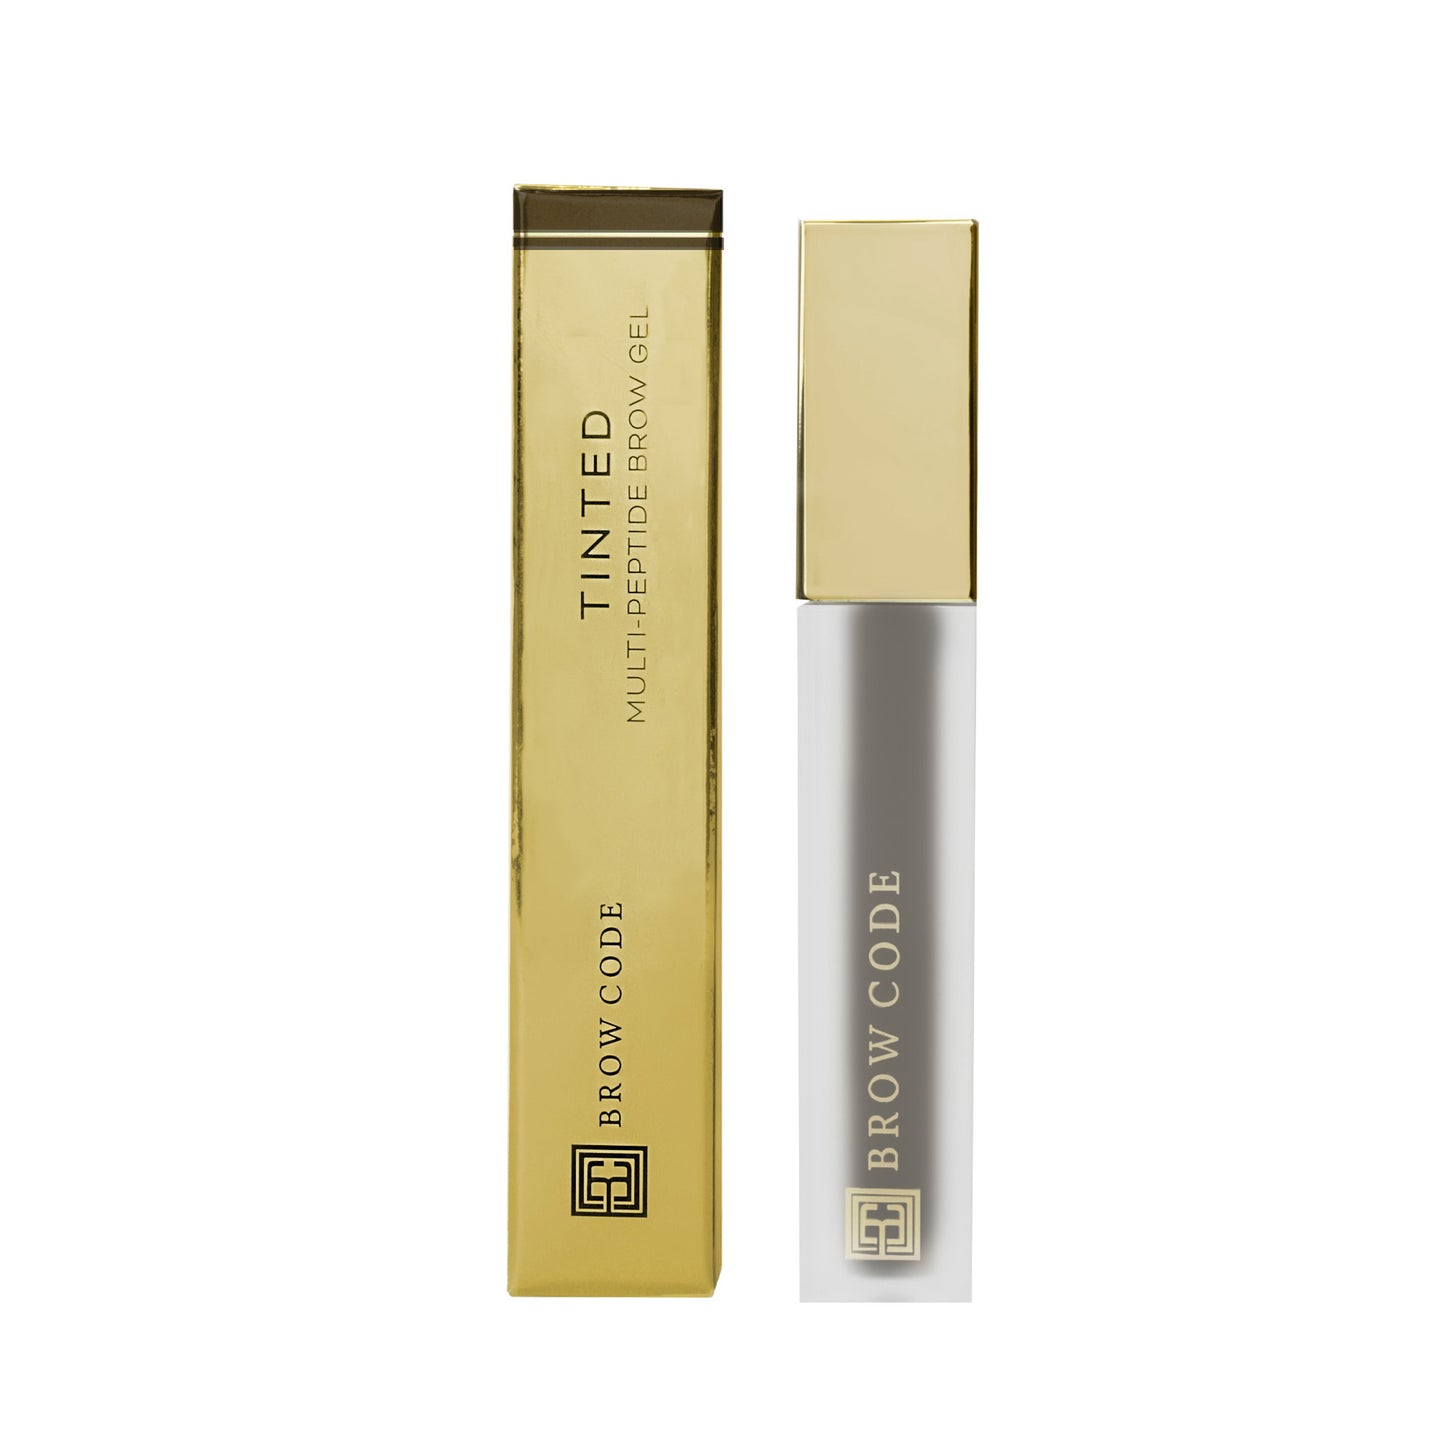 Tinted Multi-Peptide Brow Gel - Color-Dark Brown- product alongside packaging against a white background